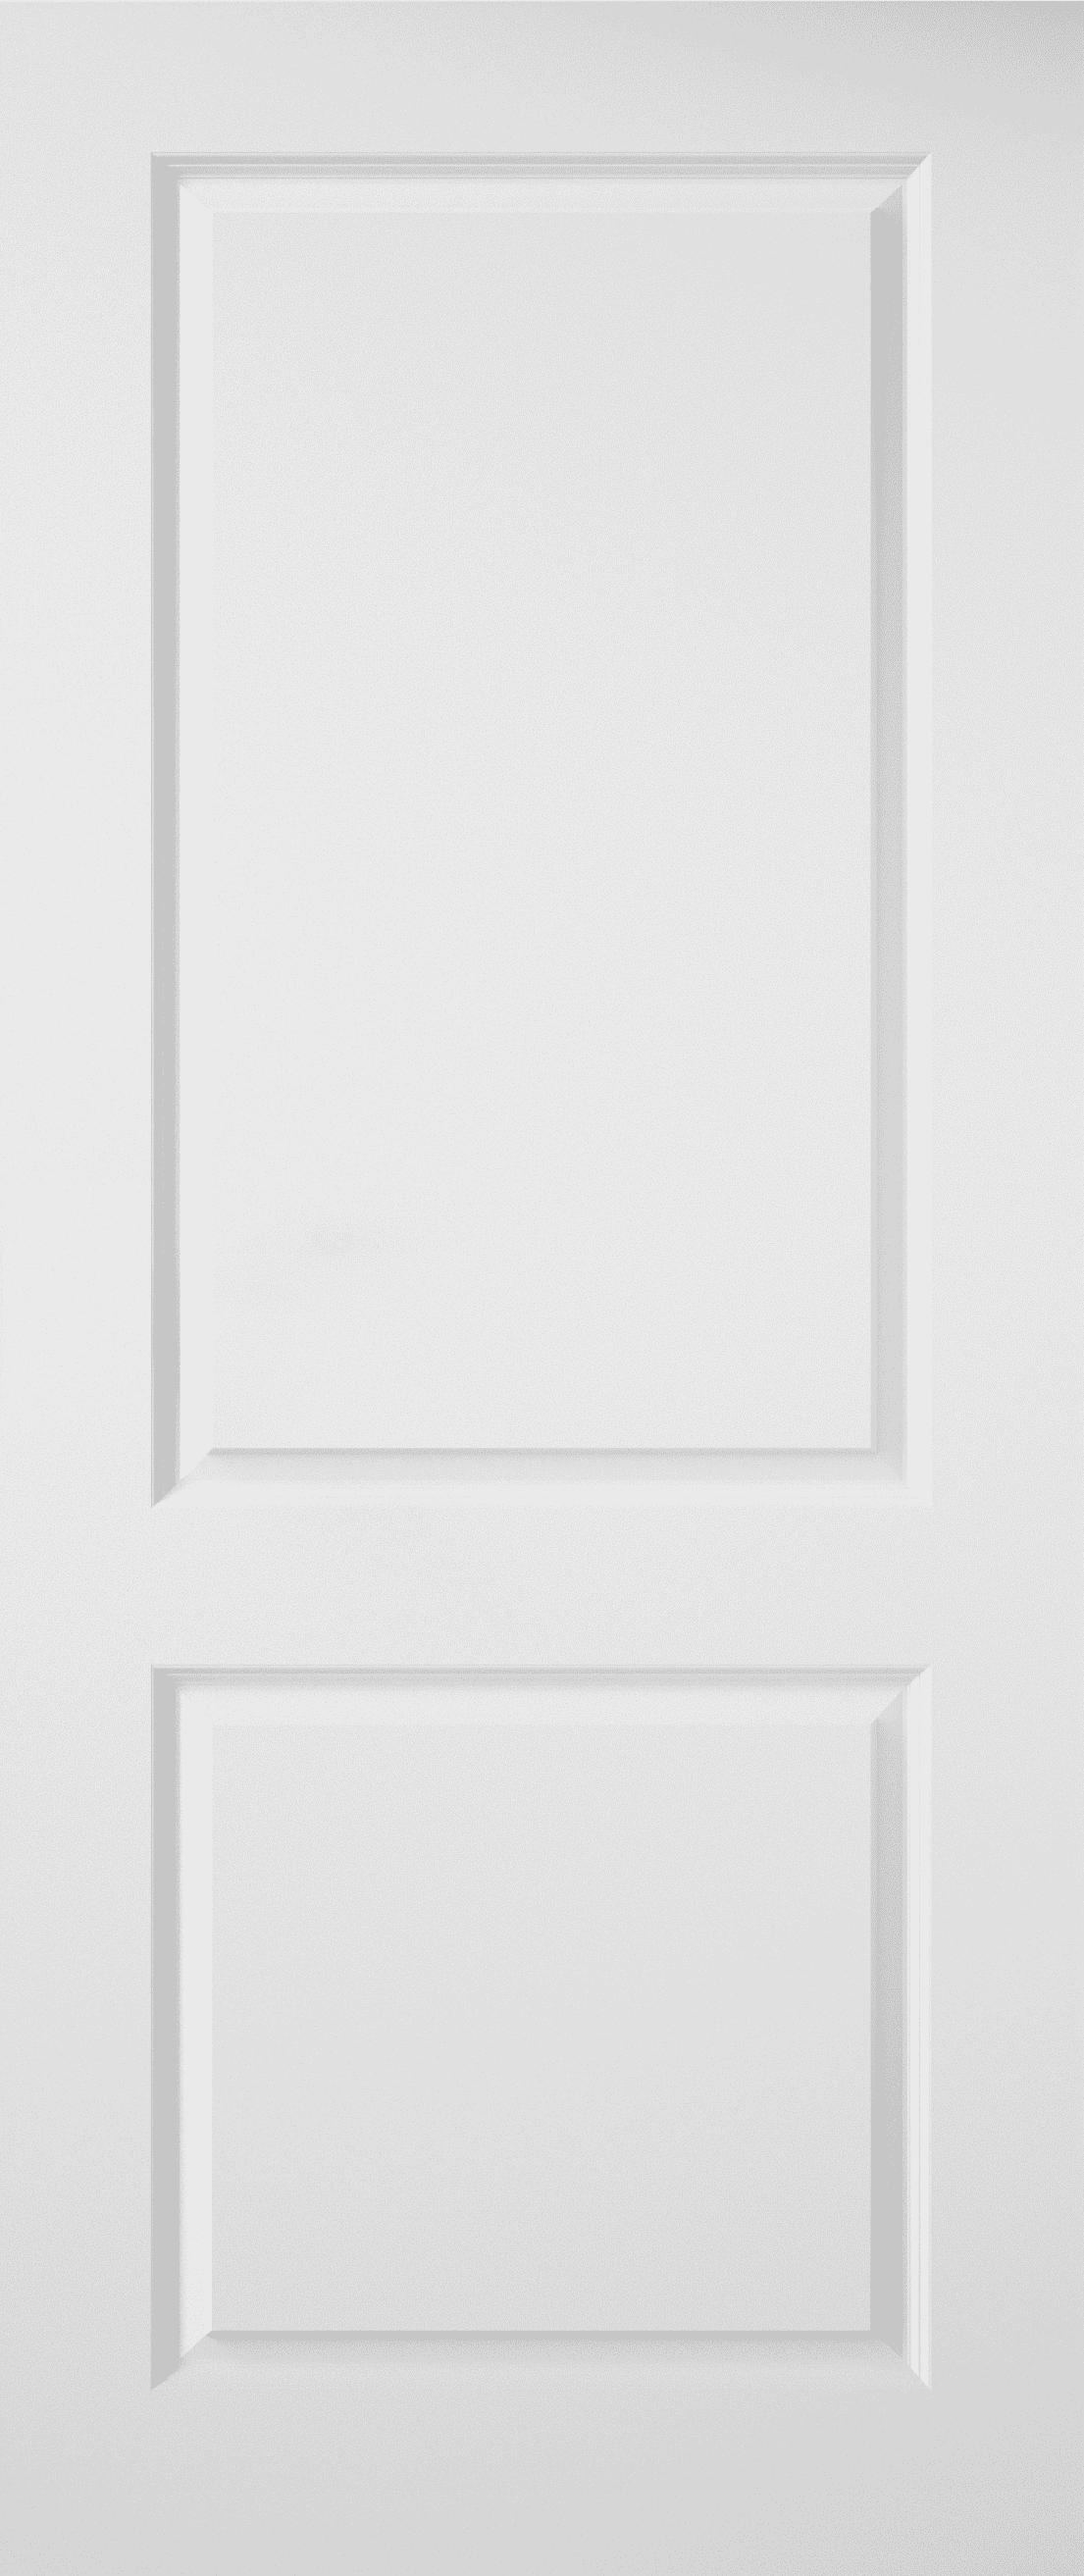 Premdor White Moulded Smooth 2 Panel Internal Doors at Vibrant Doors